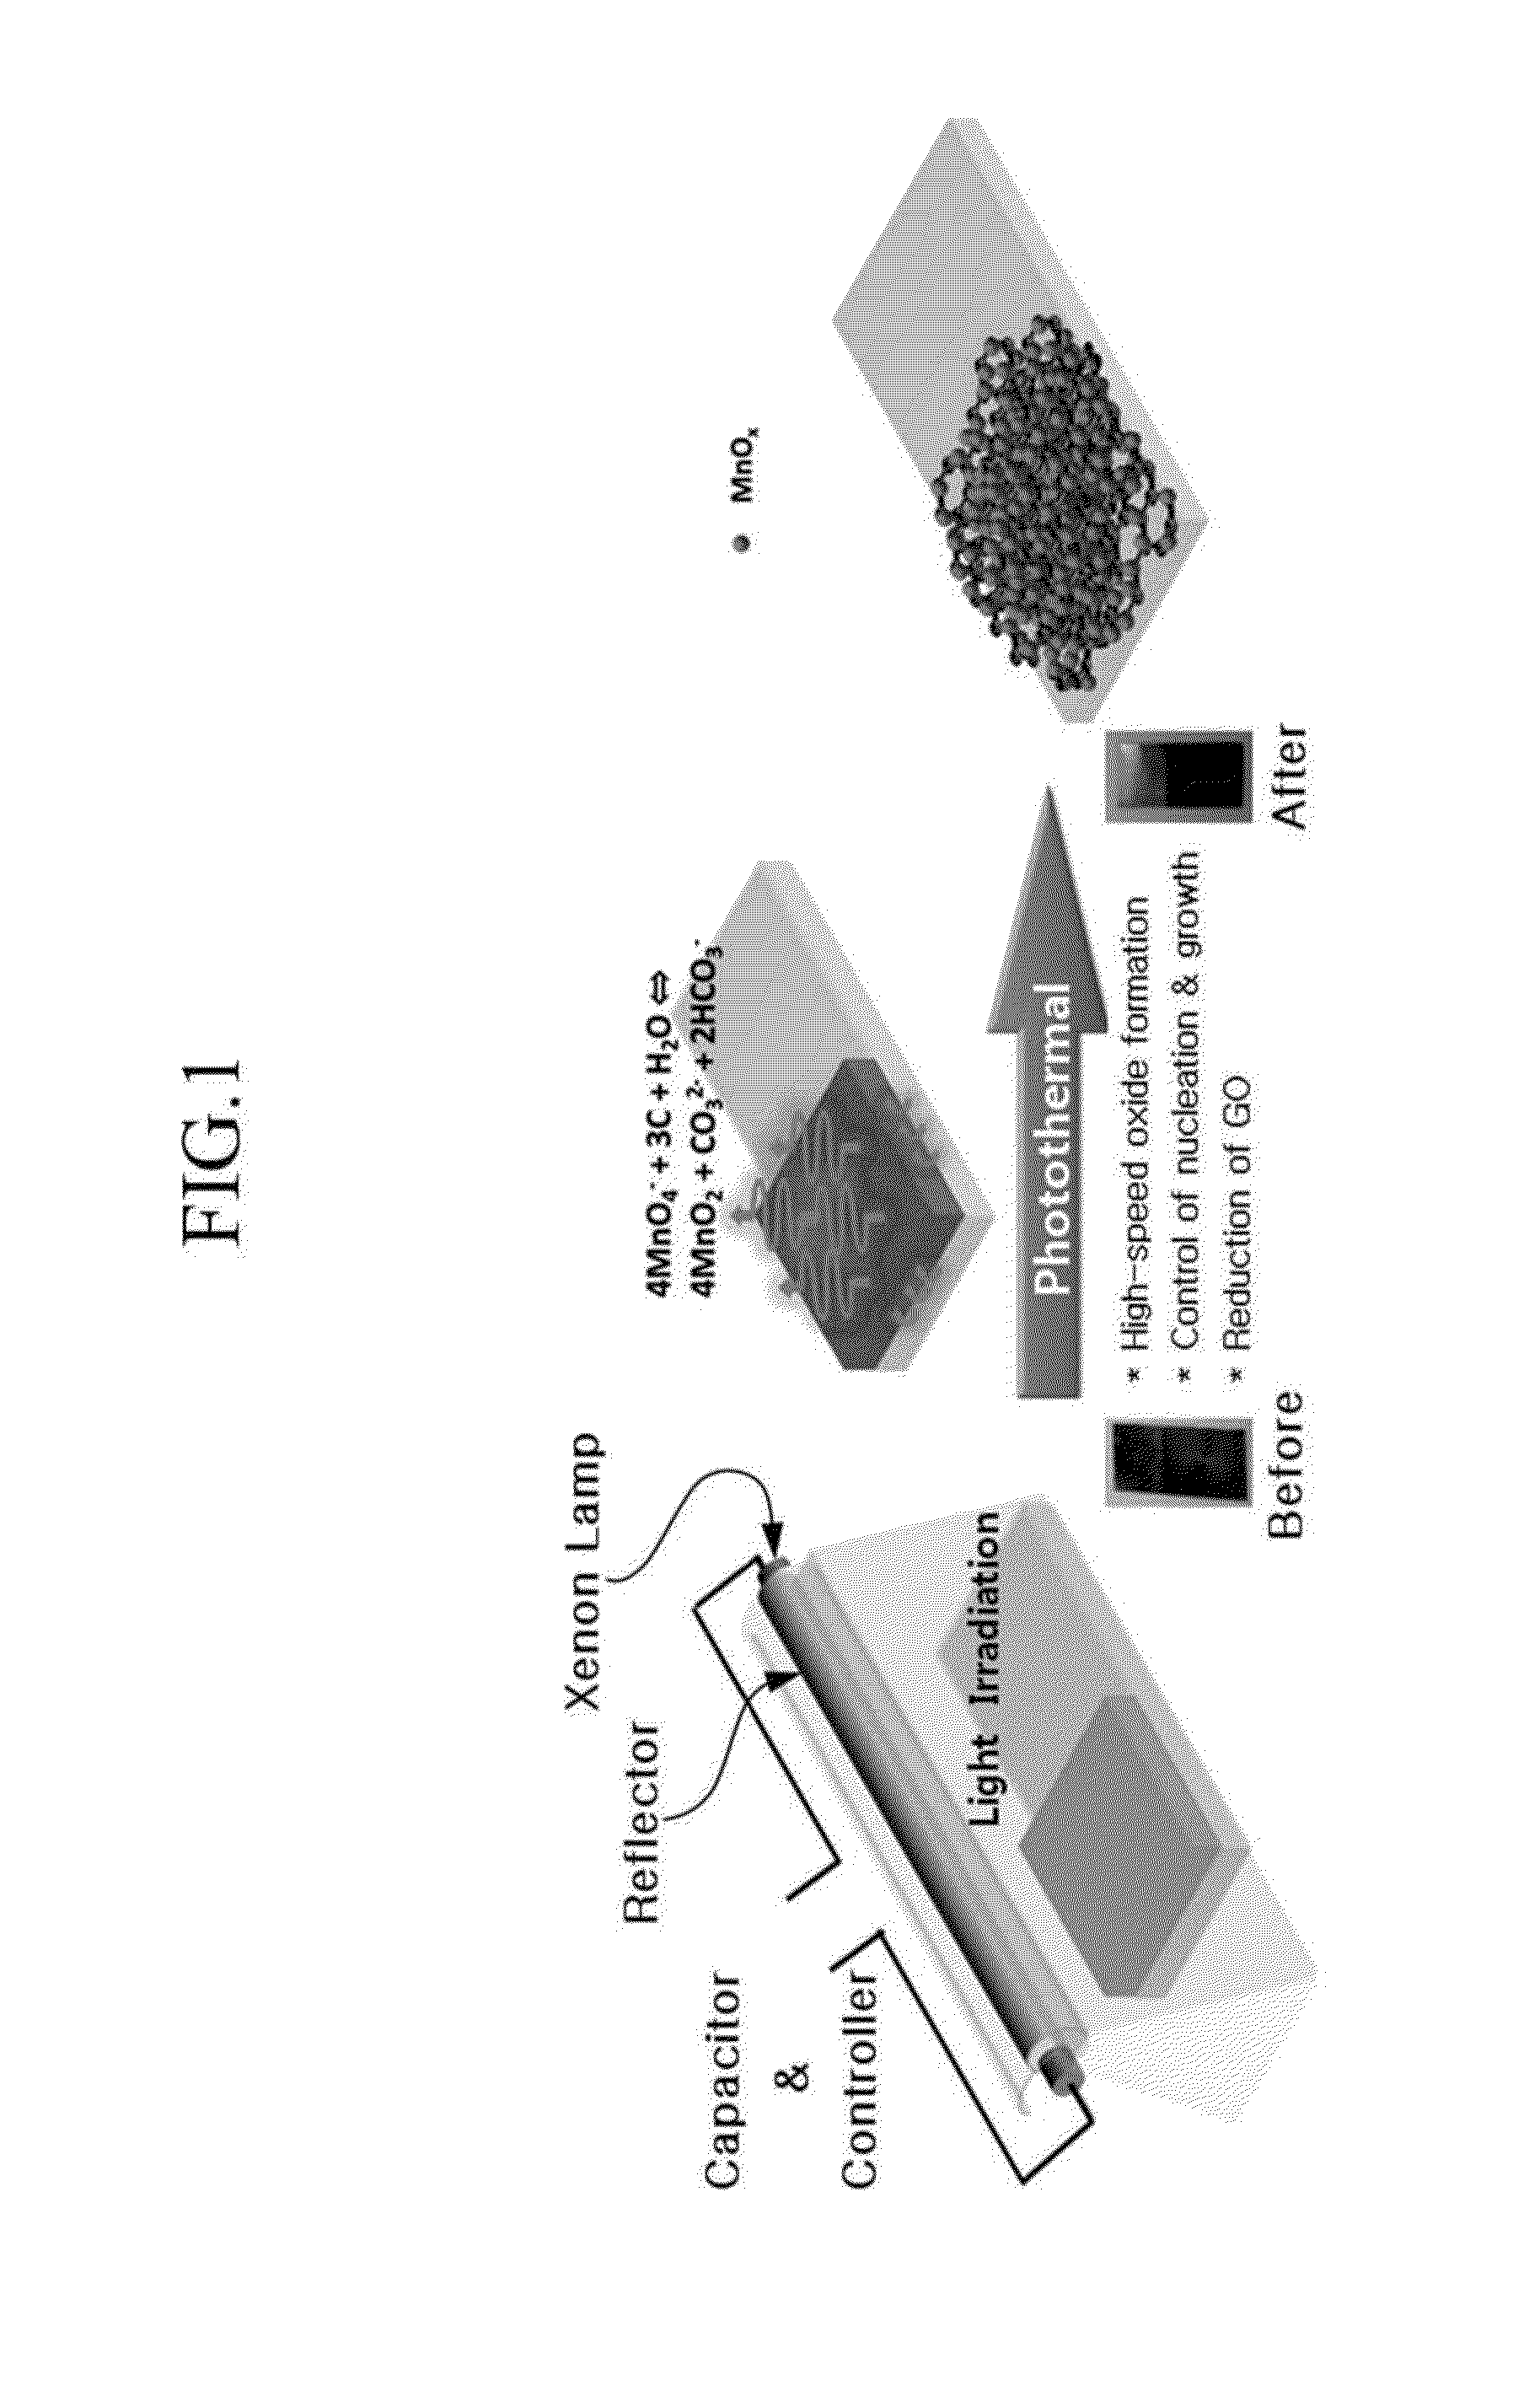 Method for manufacturing electrode, electrode manufactured according to the method, supercapacitor including the electrode, and rechargable lithium battery including the electrode